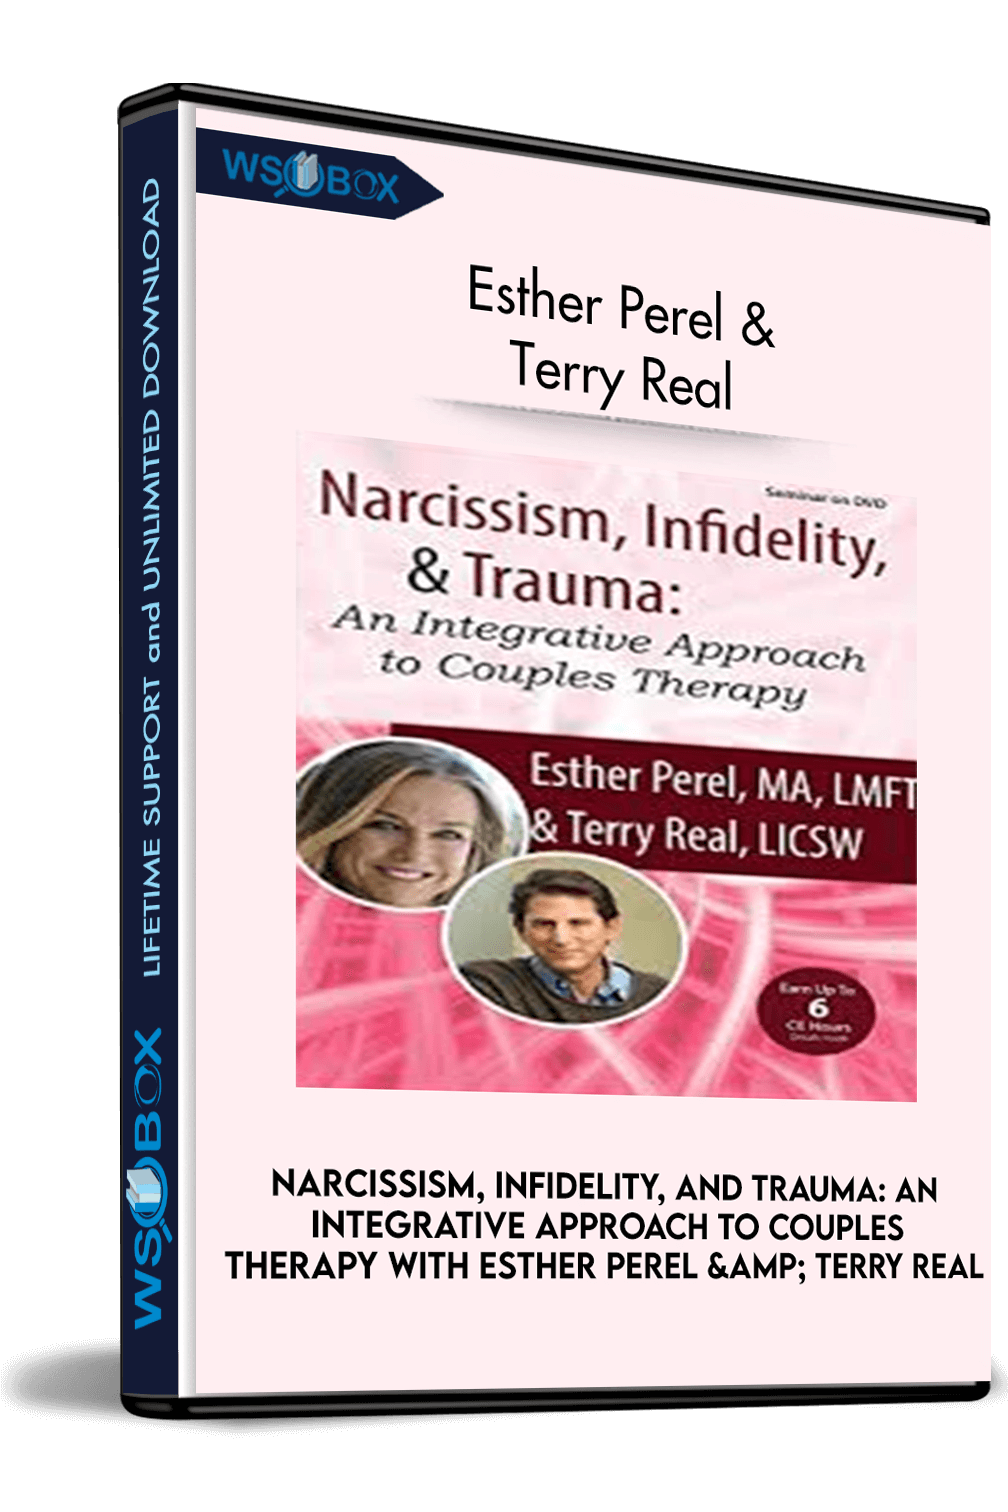 Narcissism, Infidelity, and Trauma: An Integrative Approach to Couples Therapy with Esther Perel & Terry Real – Esther Perel &  Terry Real